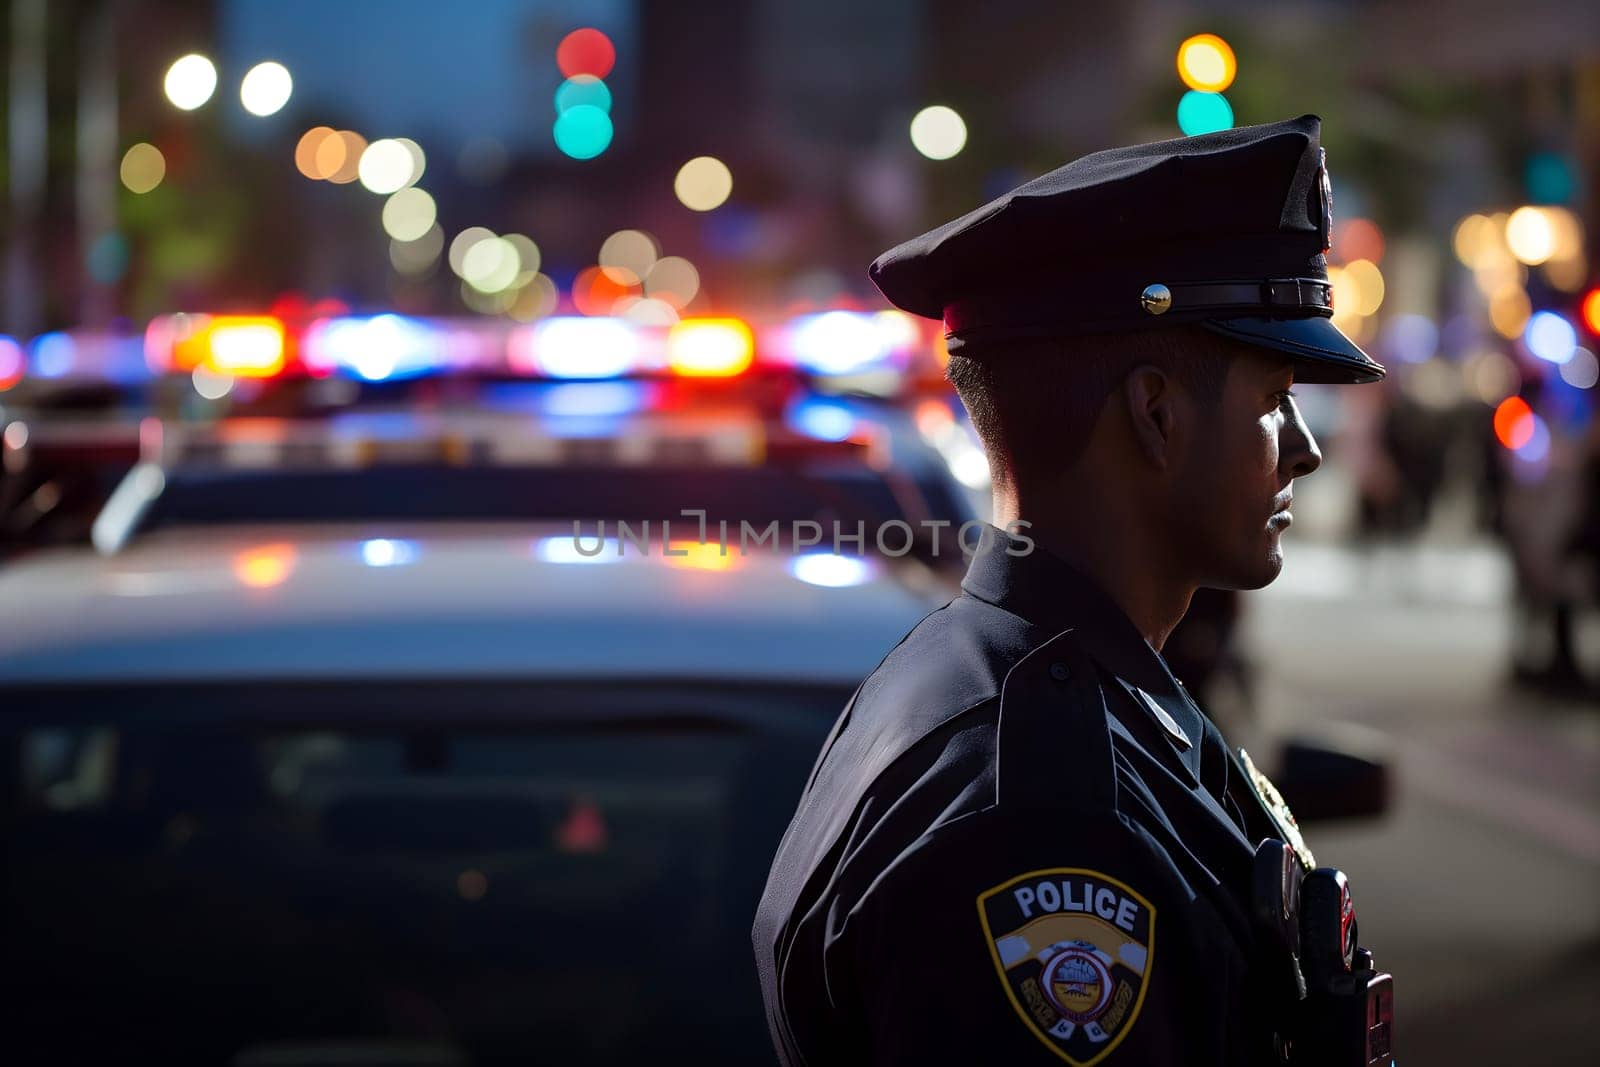 Police officer near car with lights in city street with selective focus and background blur. Neural network generated image. Not based on any actual person or scene.